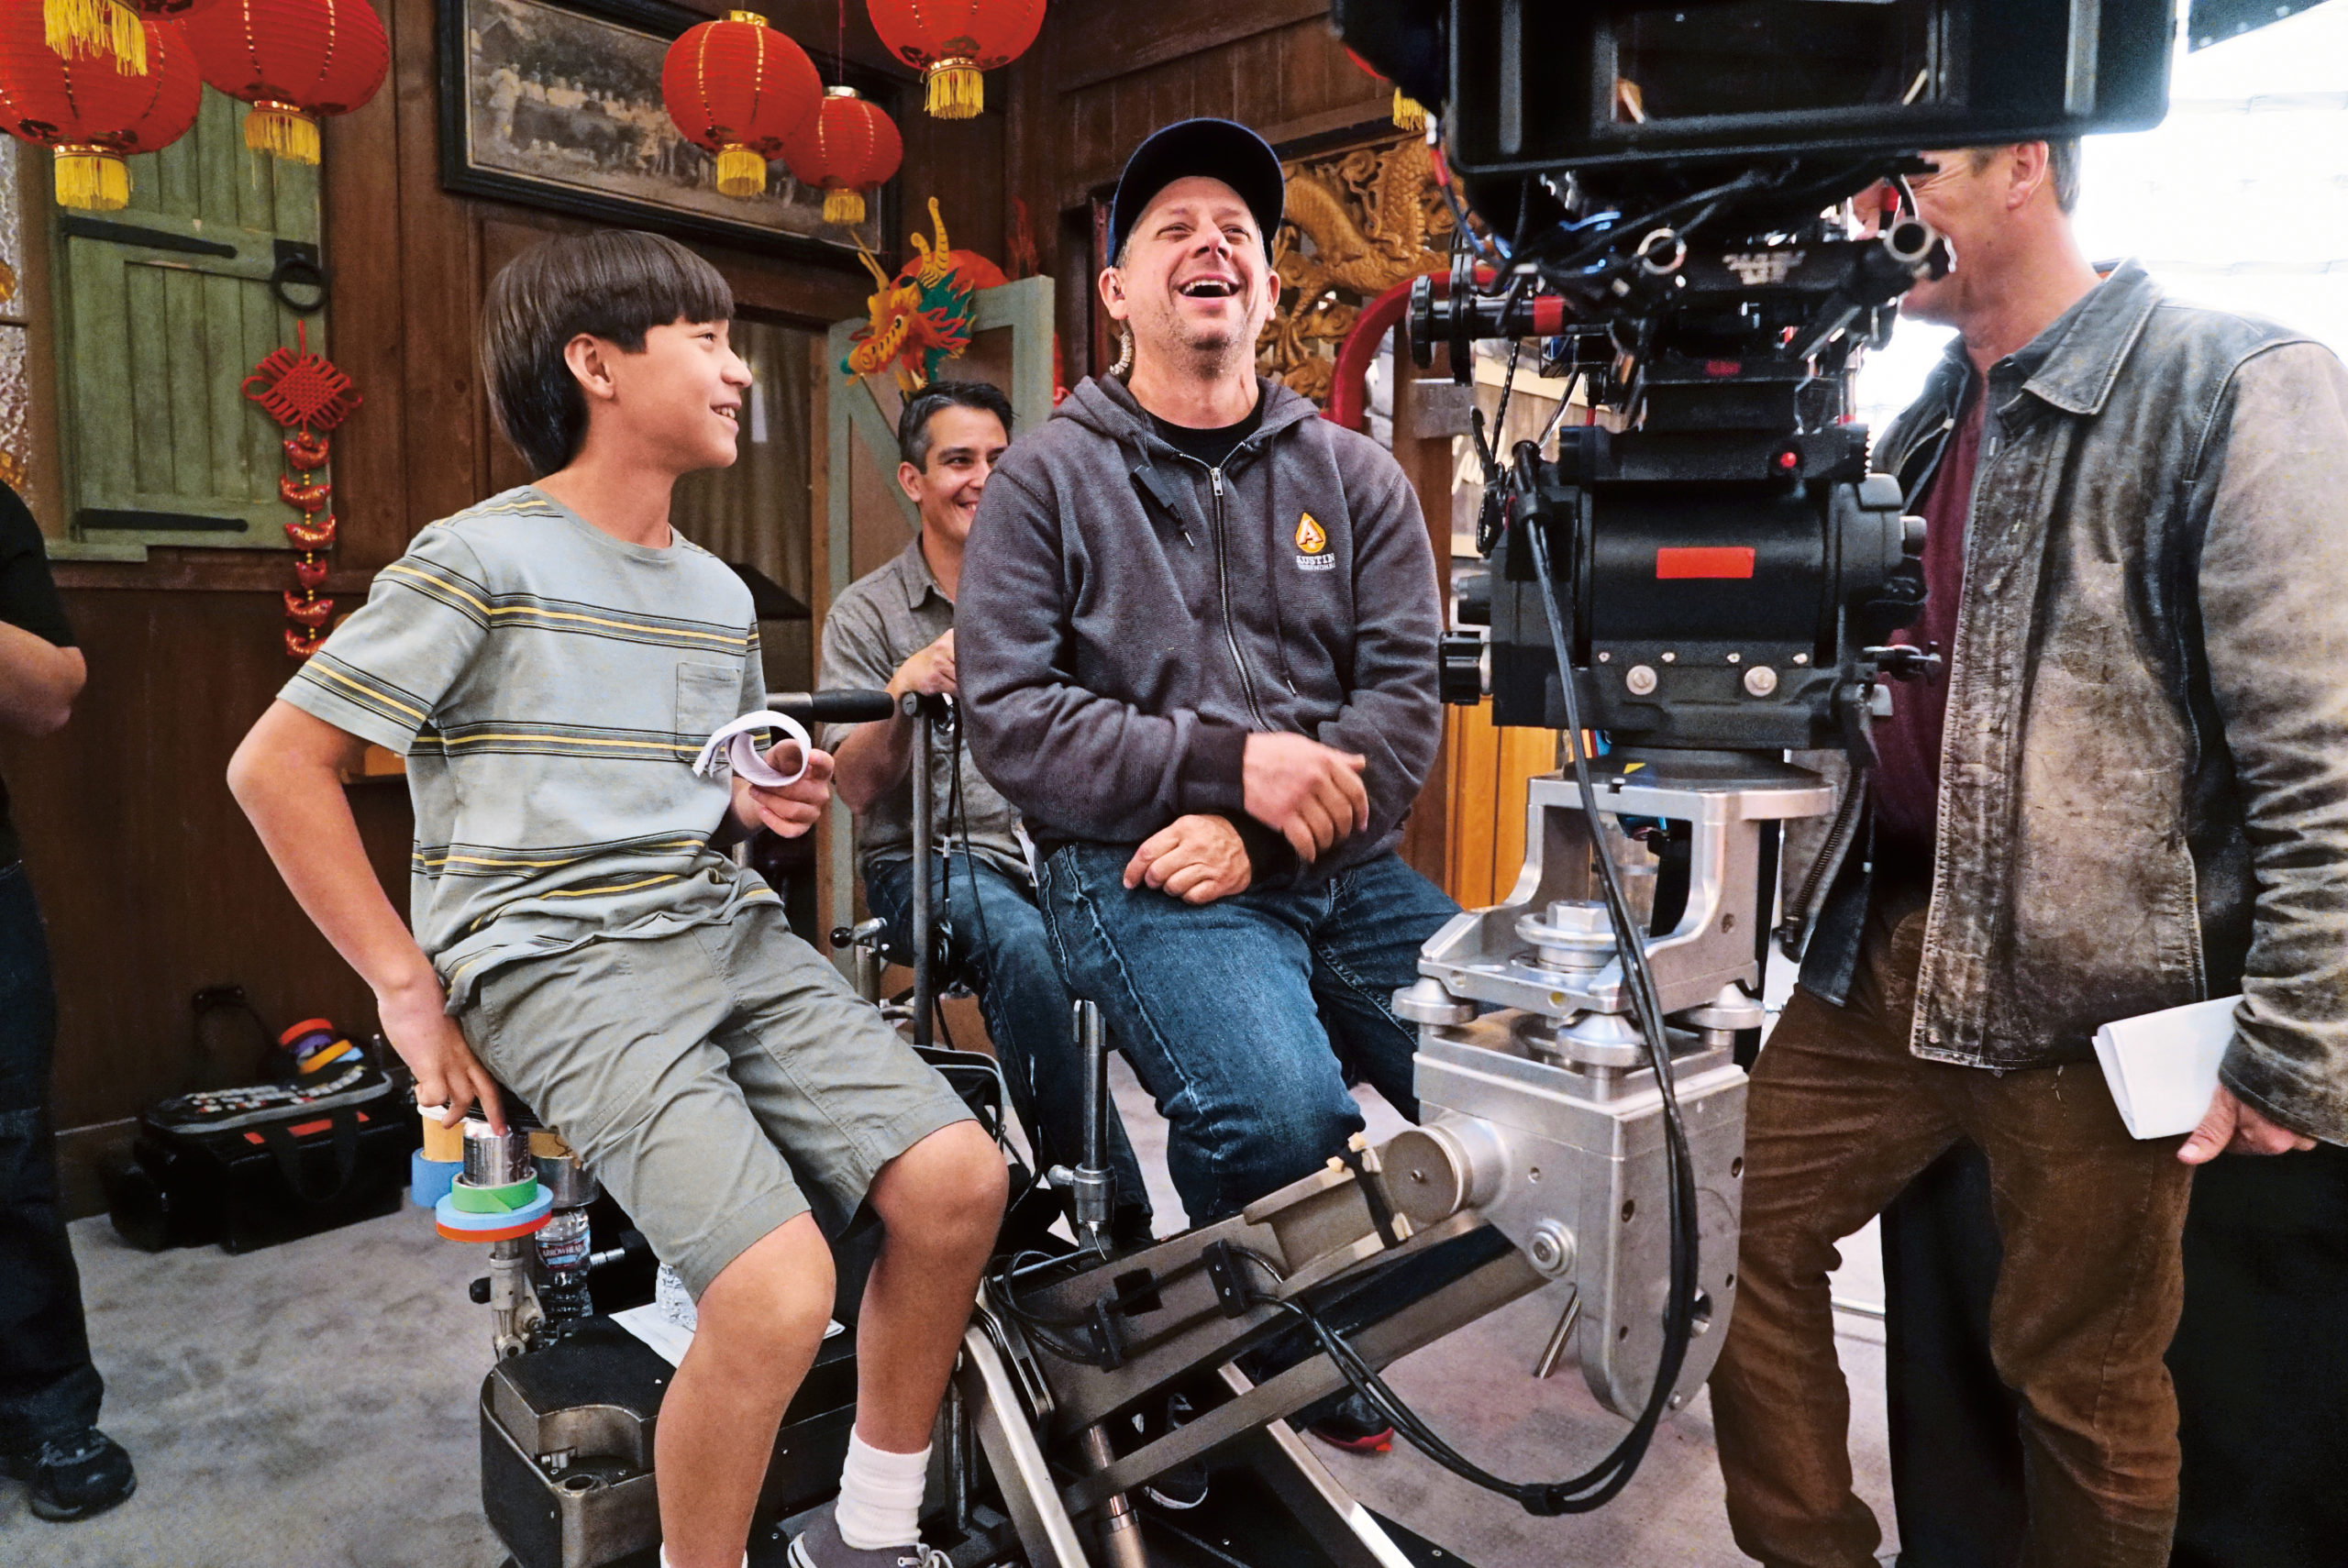 'Fresh Off the Boat' Photo to Ring in Chinese New Year